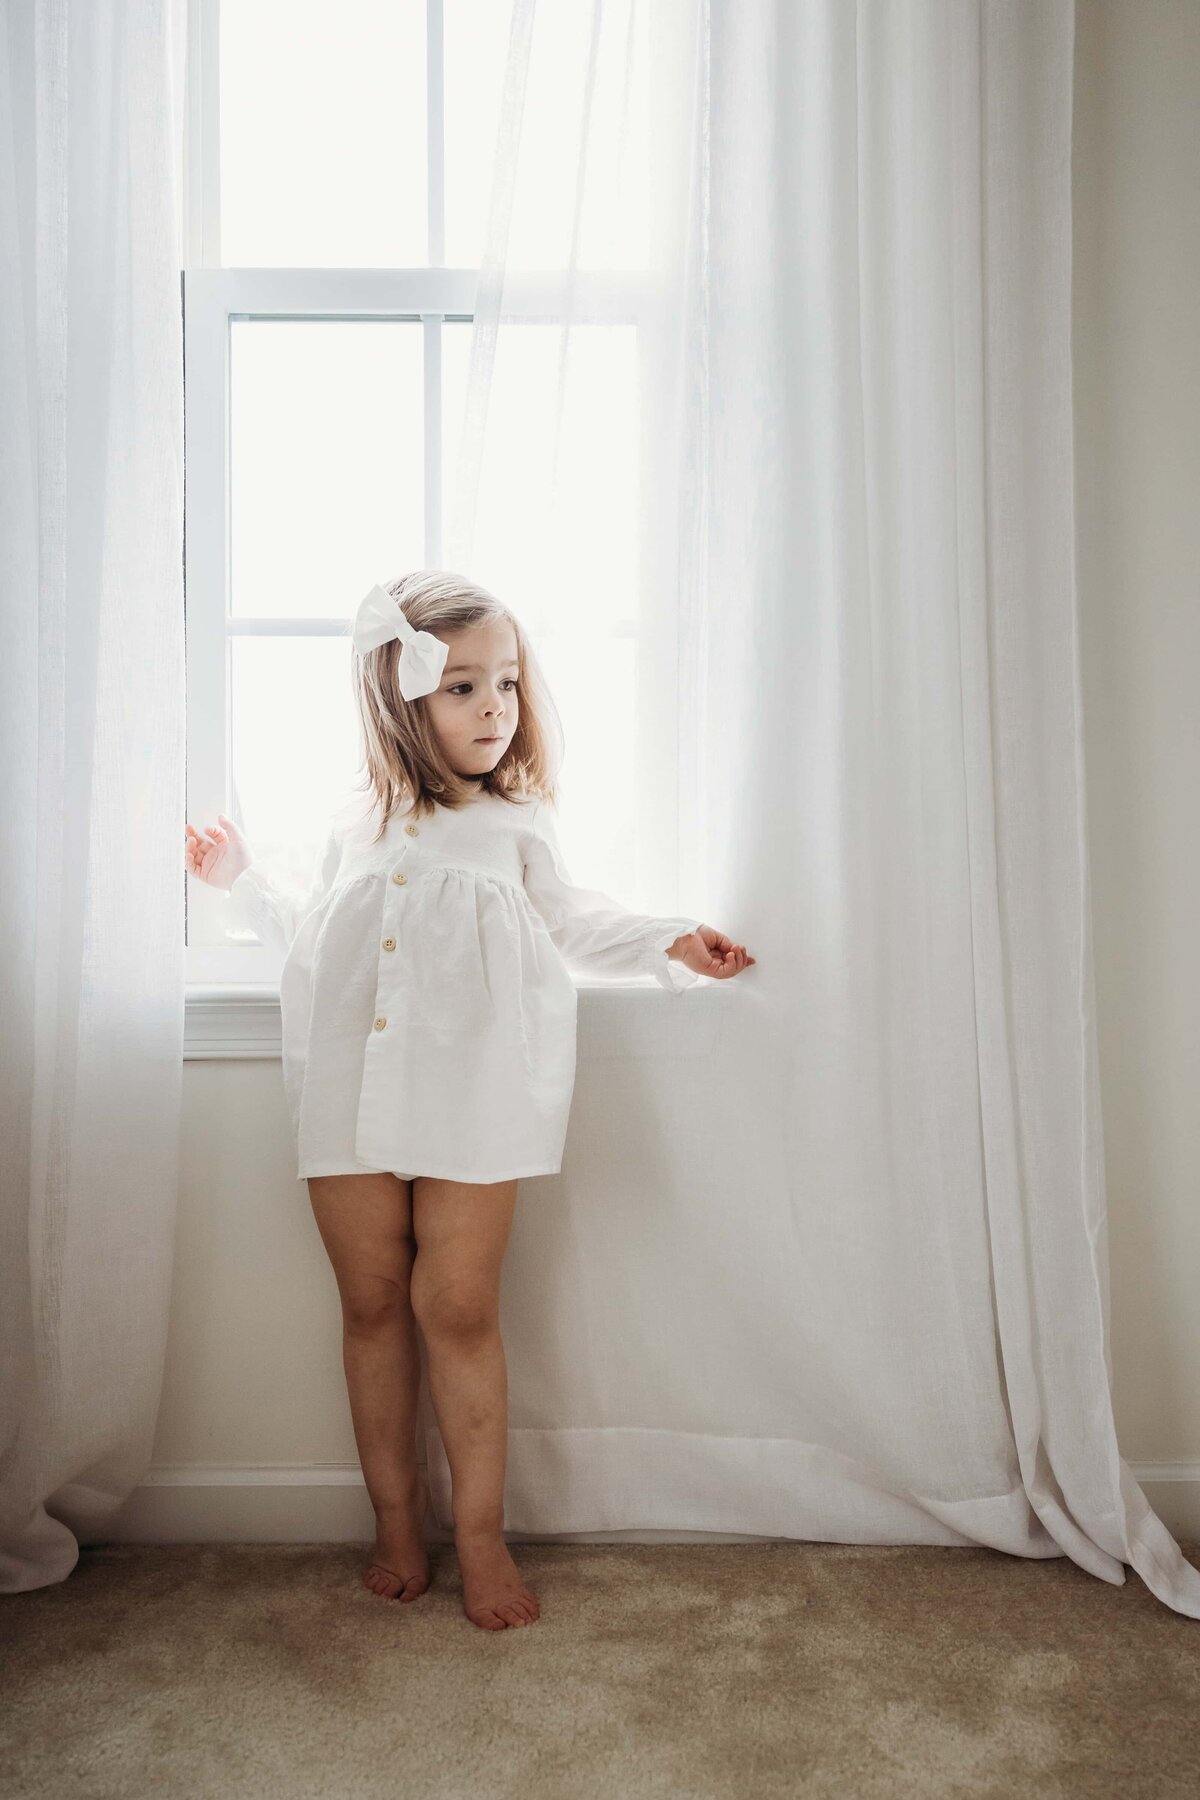 A young child in a white outfit standing between curtains by a window, perfectly captured with lightroom presets for family portraits.